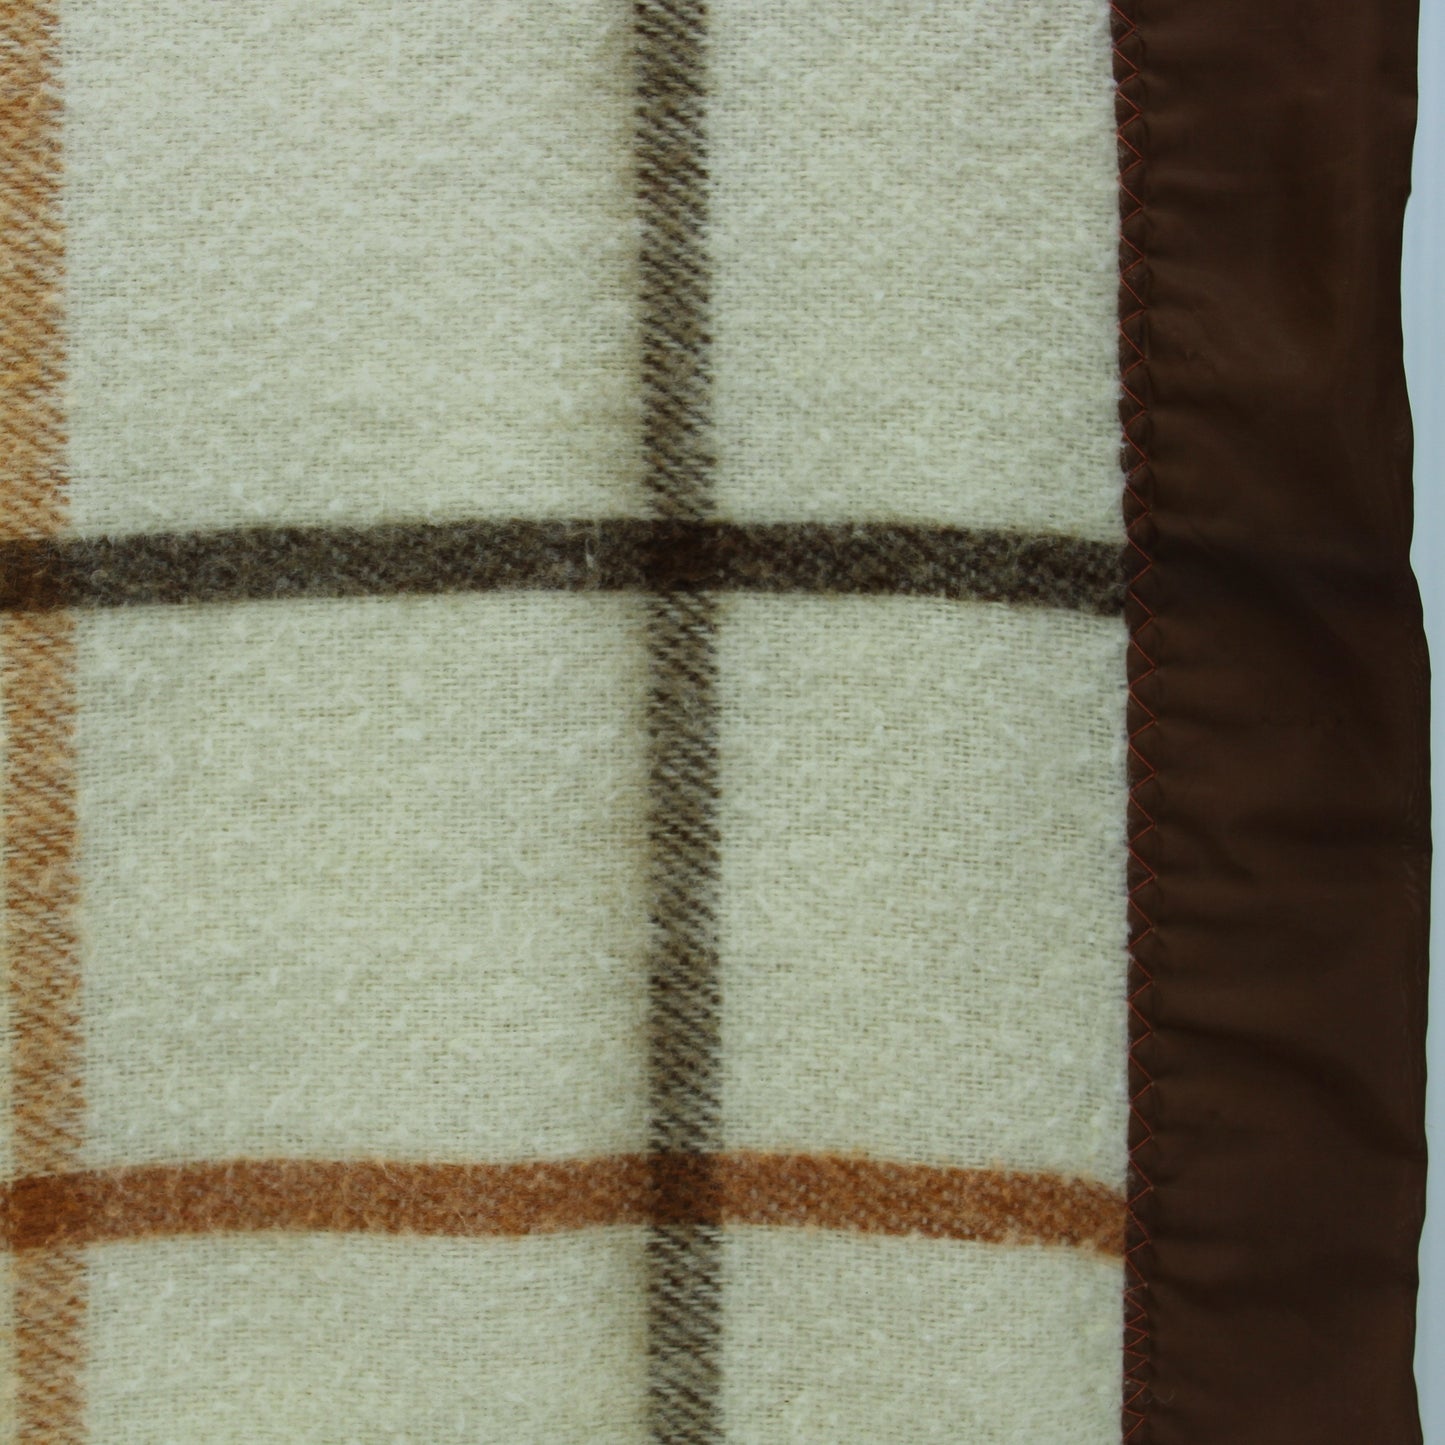 Unbranded Acrylic Blanket Cream Shades of Brown Block Design - 70" X 86" closeup view of fabric pattern binding